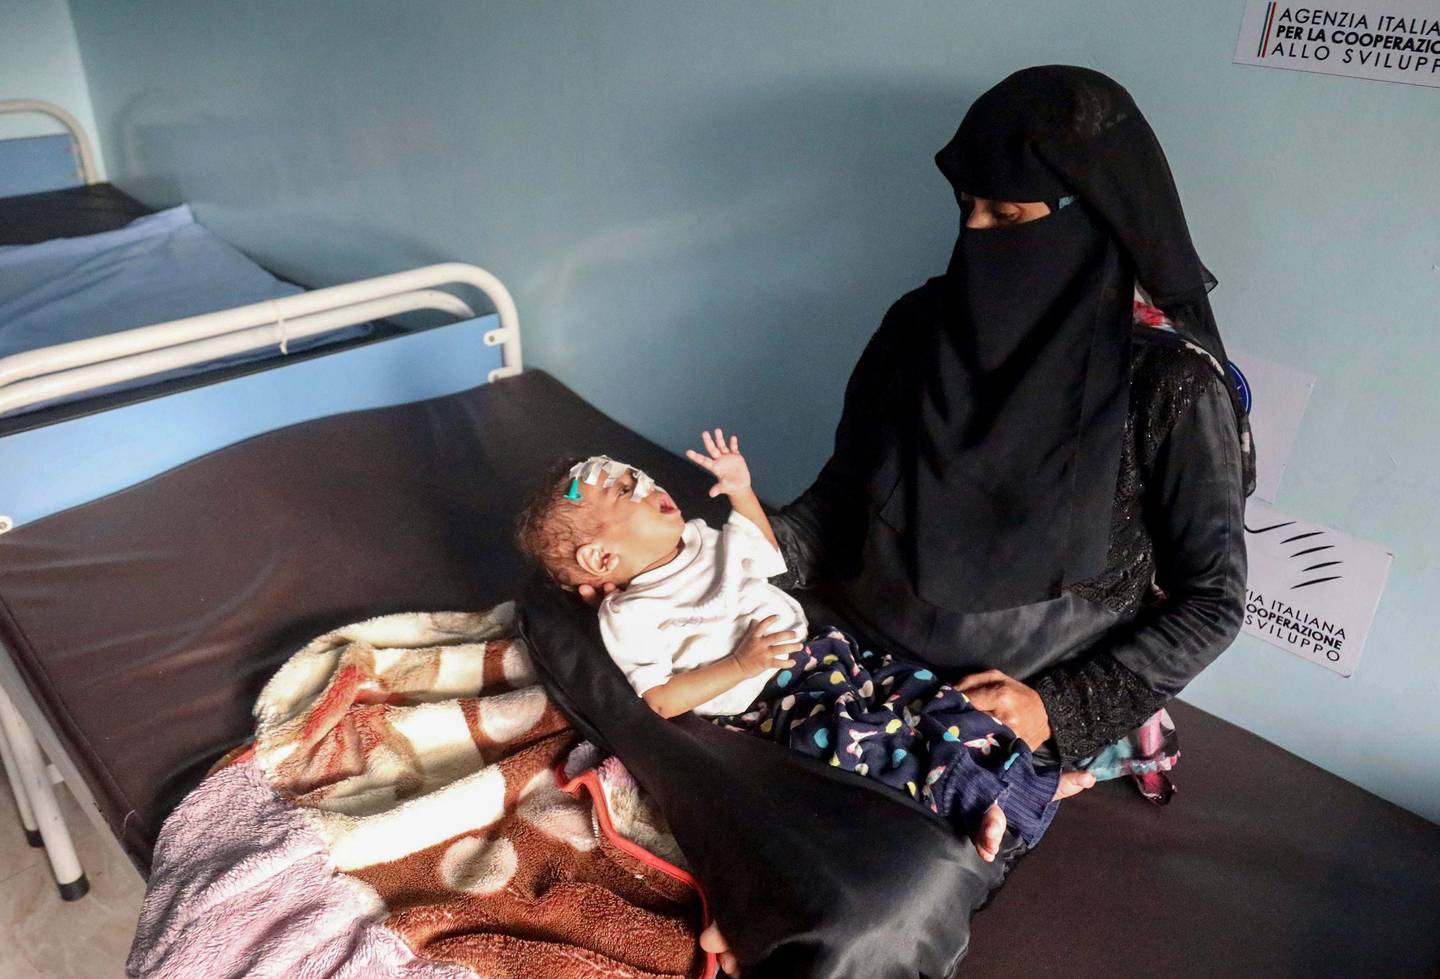 A Yemeni mother comforts her child suffering from malnutrition at a treatment centre in the country's third largest city of Taez, on November 24, 2020. (Photo by AHMAD AL-BASHA / AFP)